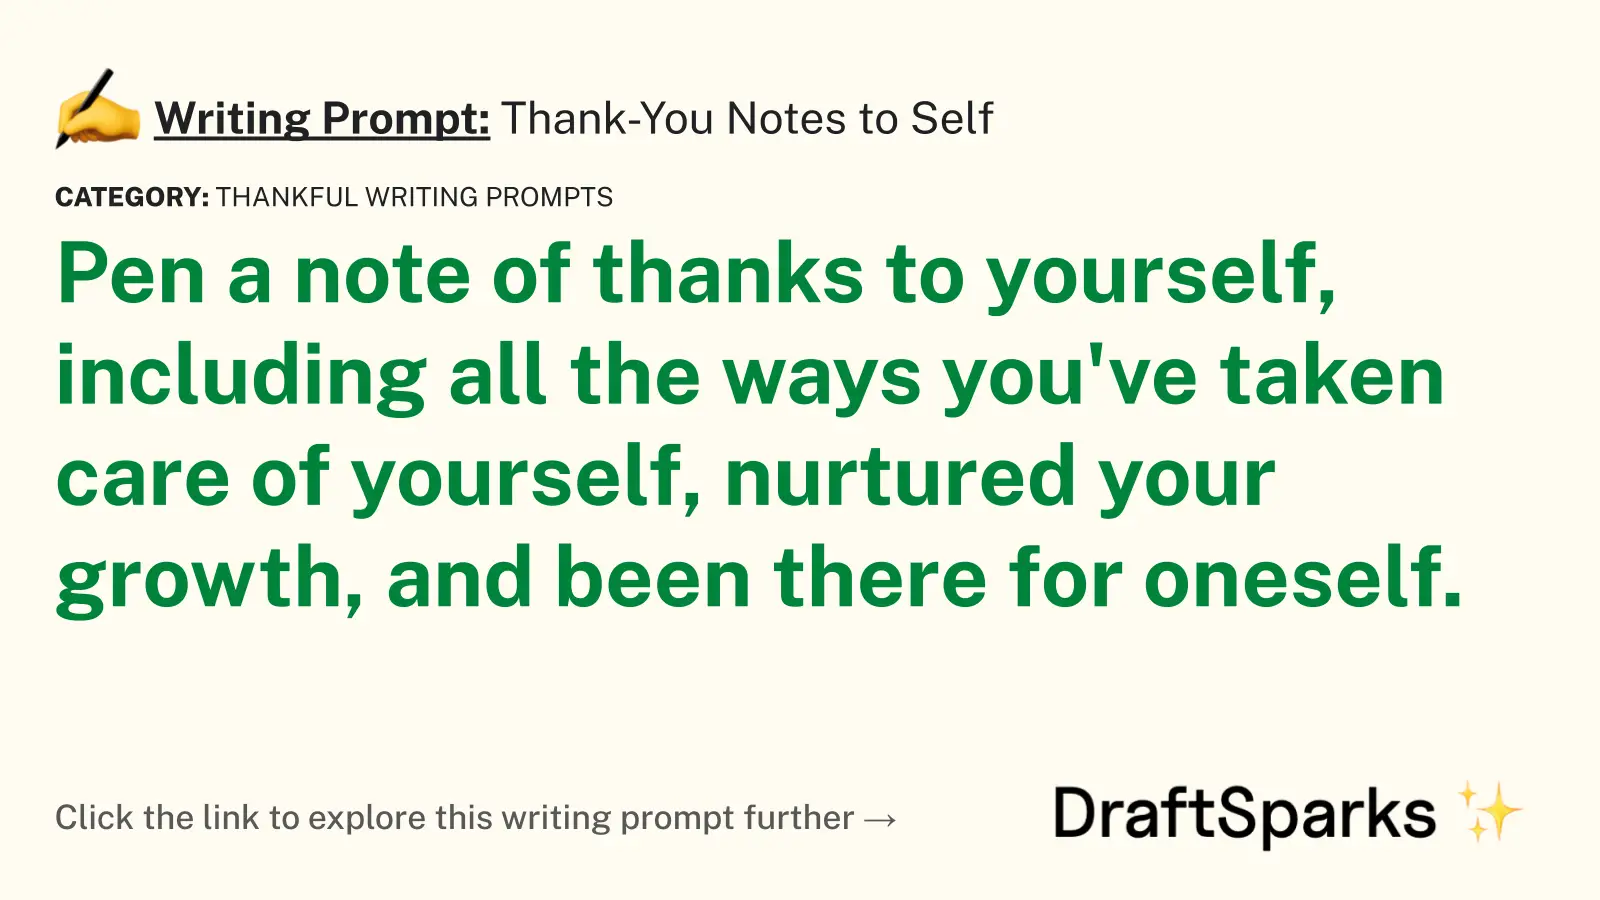 Thank-You Notes to Self